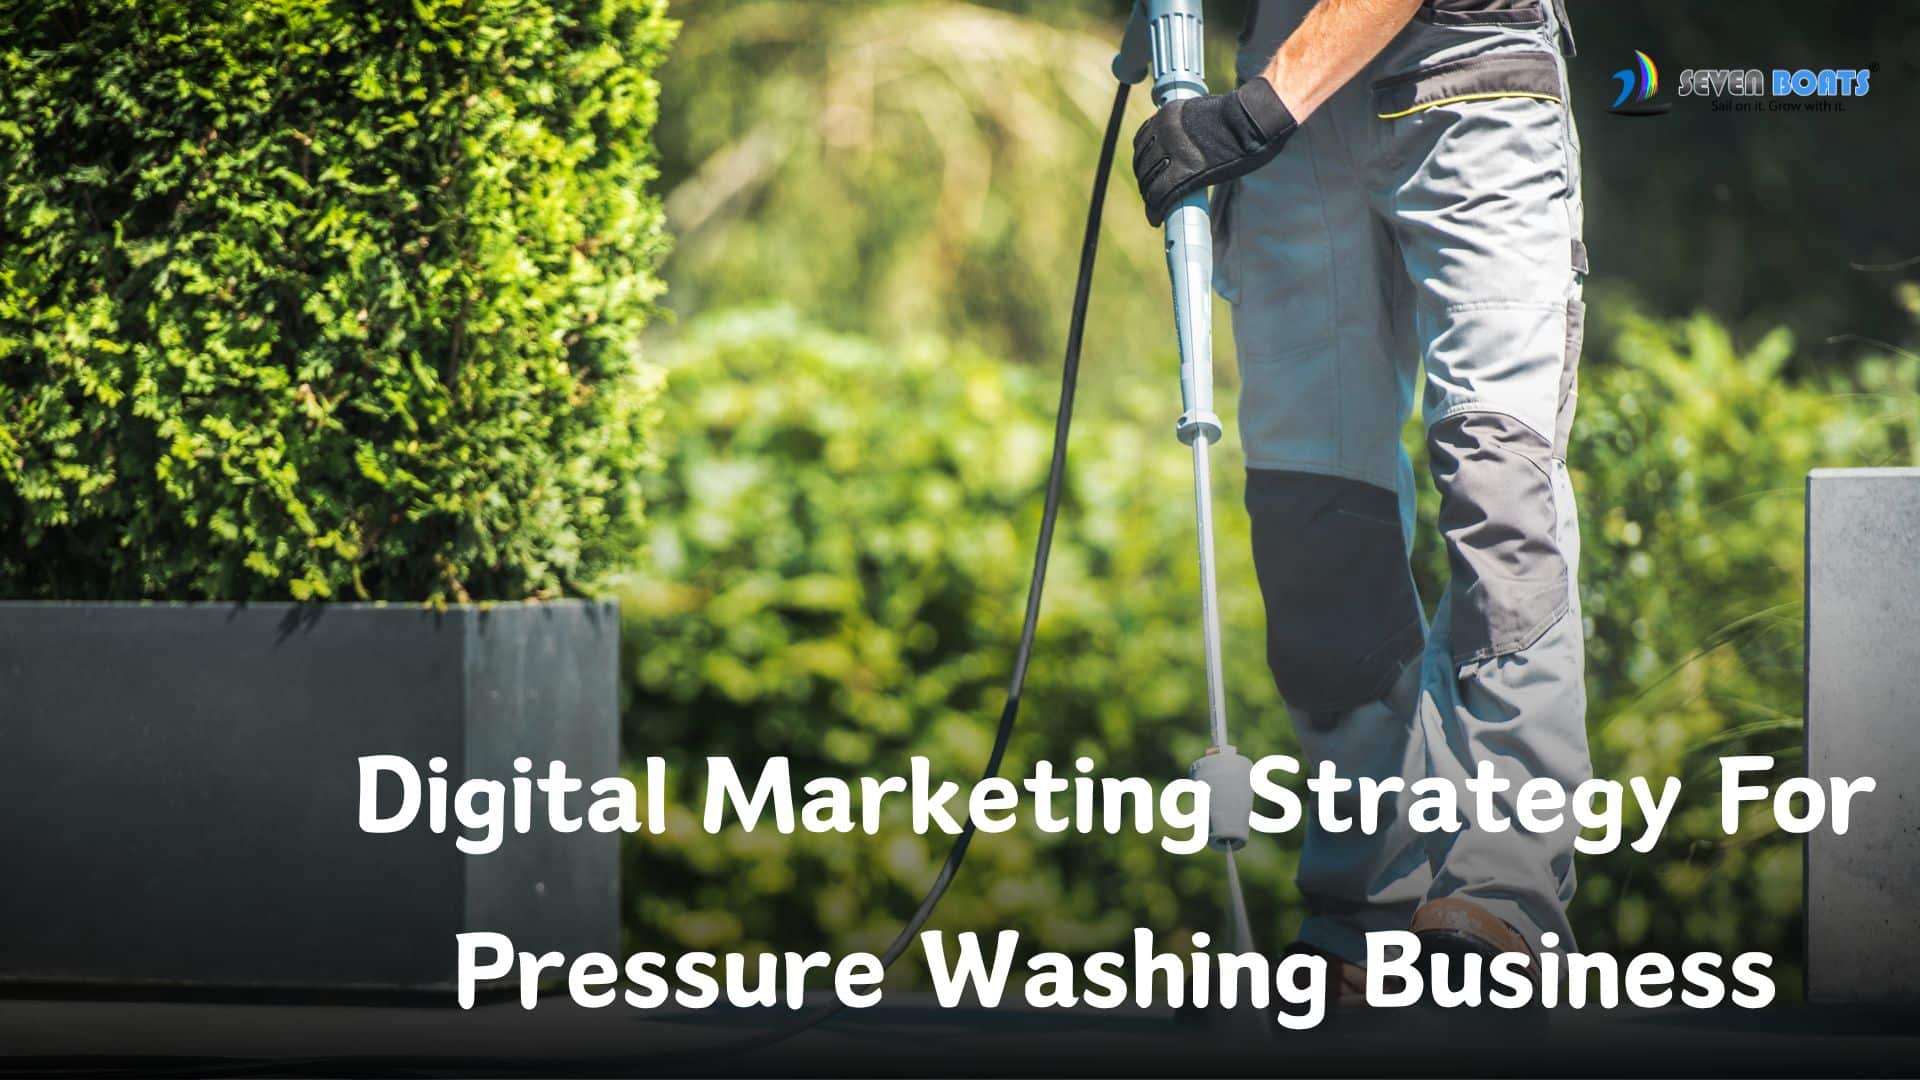 Digital Marketing Strategy For Pressure Washing Business